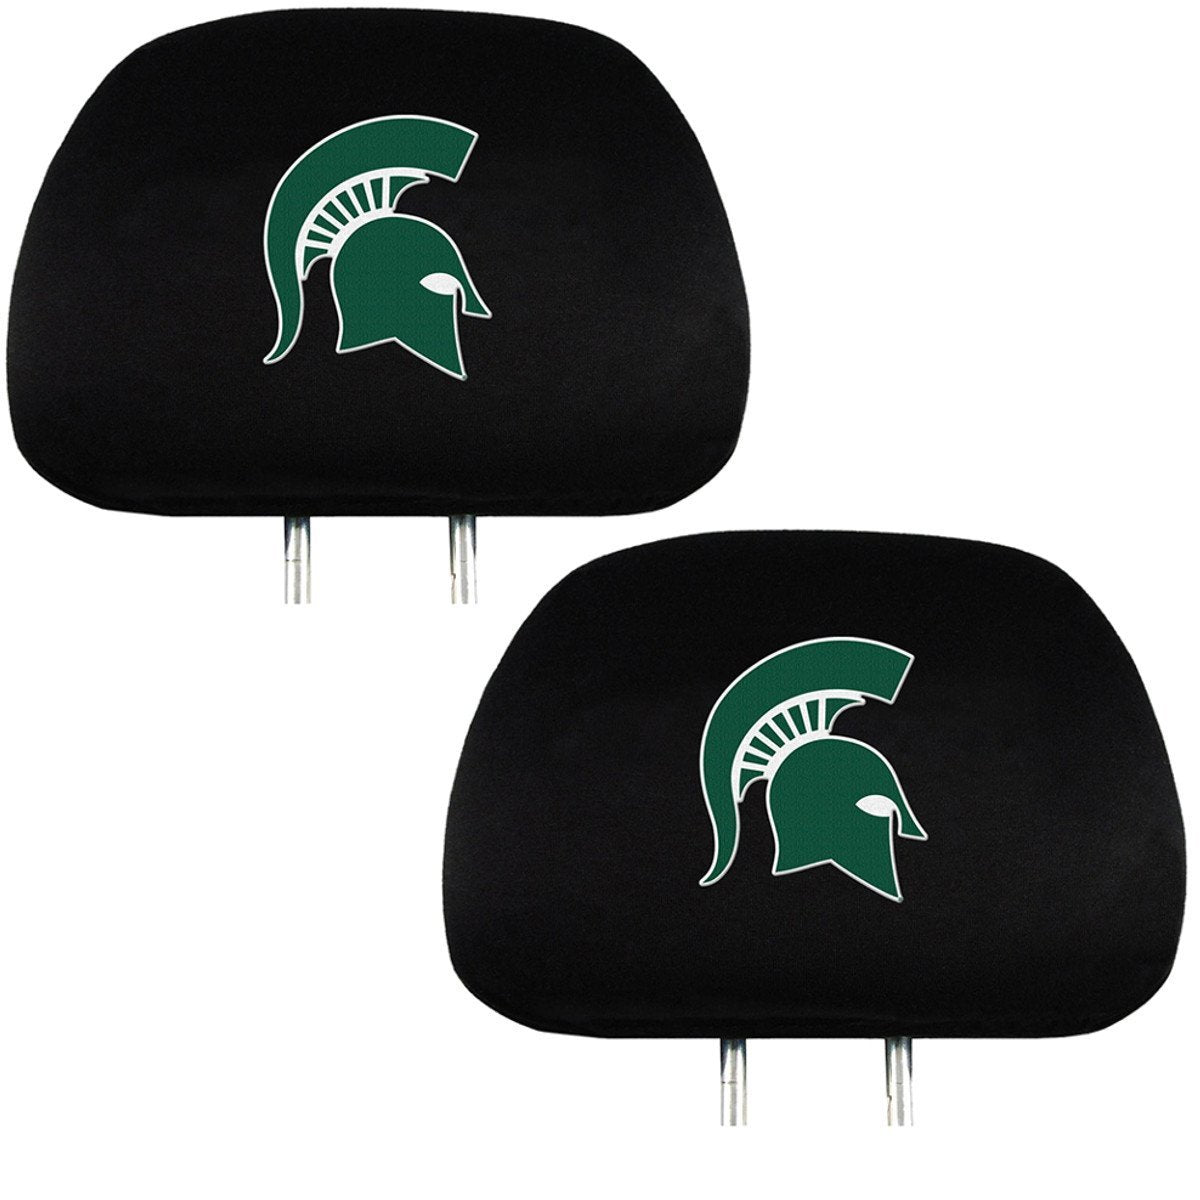 Headrest Cover Official National Collegiate Athletic Association Fan Shop Authentic NCAA Show School Pride Everywhere You Drive